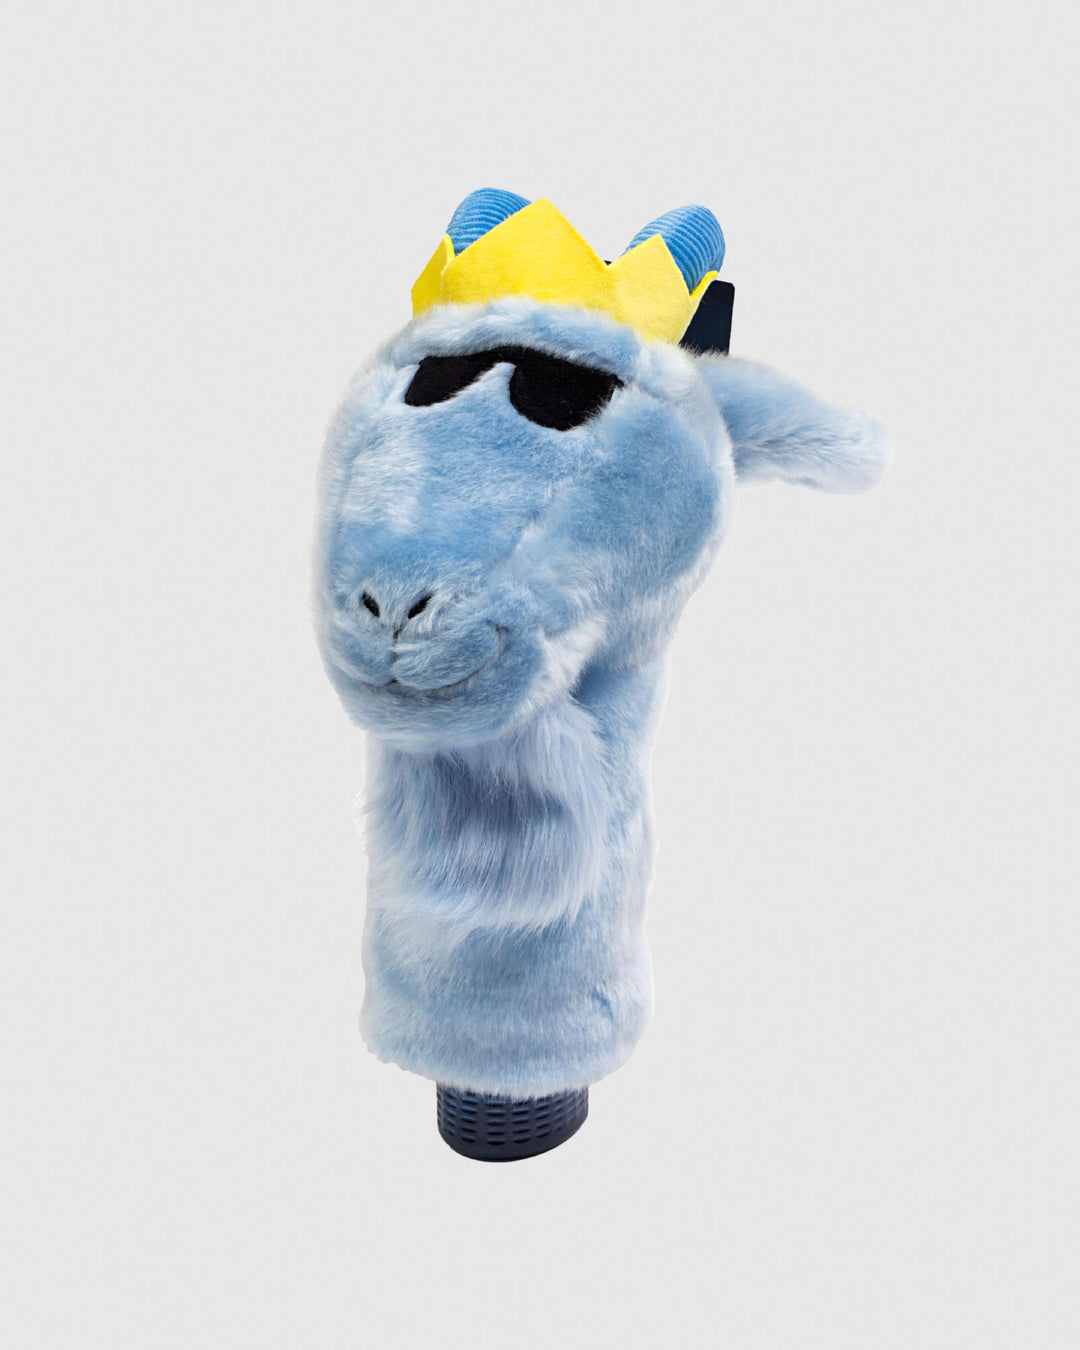 Driver cover - design is blue goat with crown and sunglasses